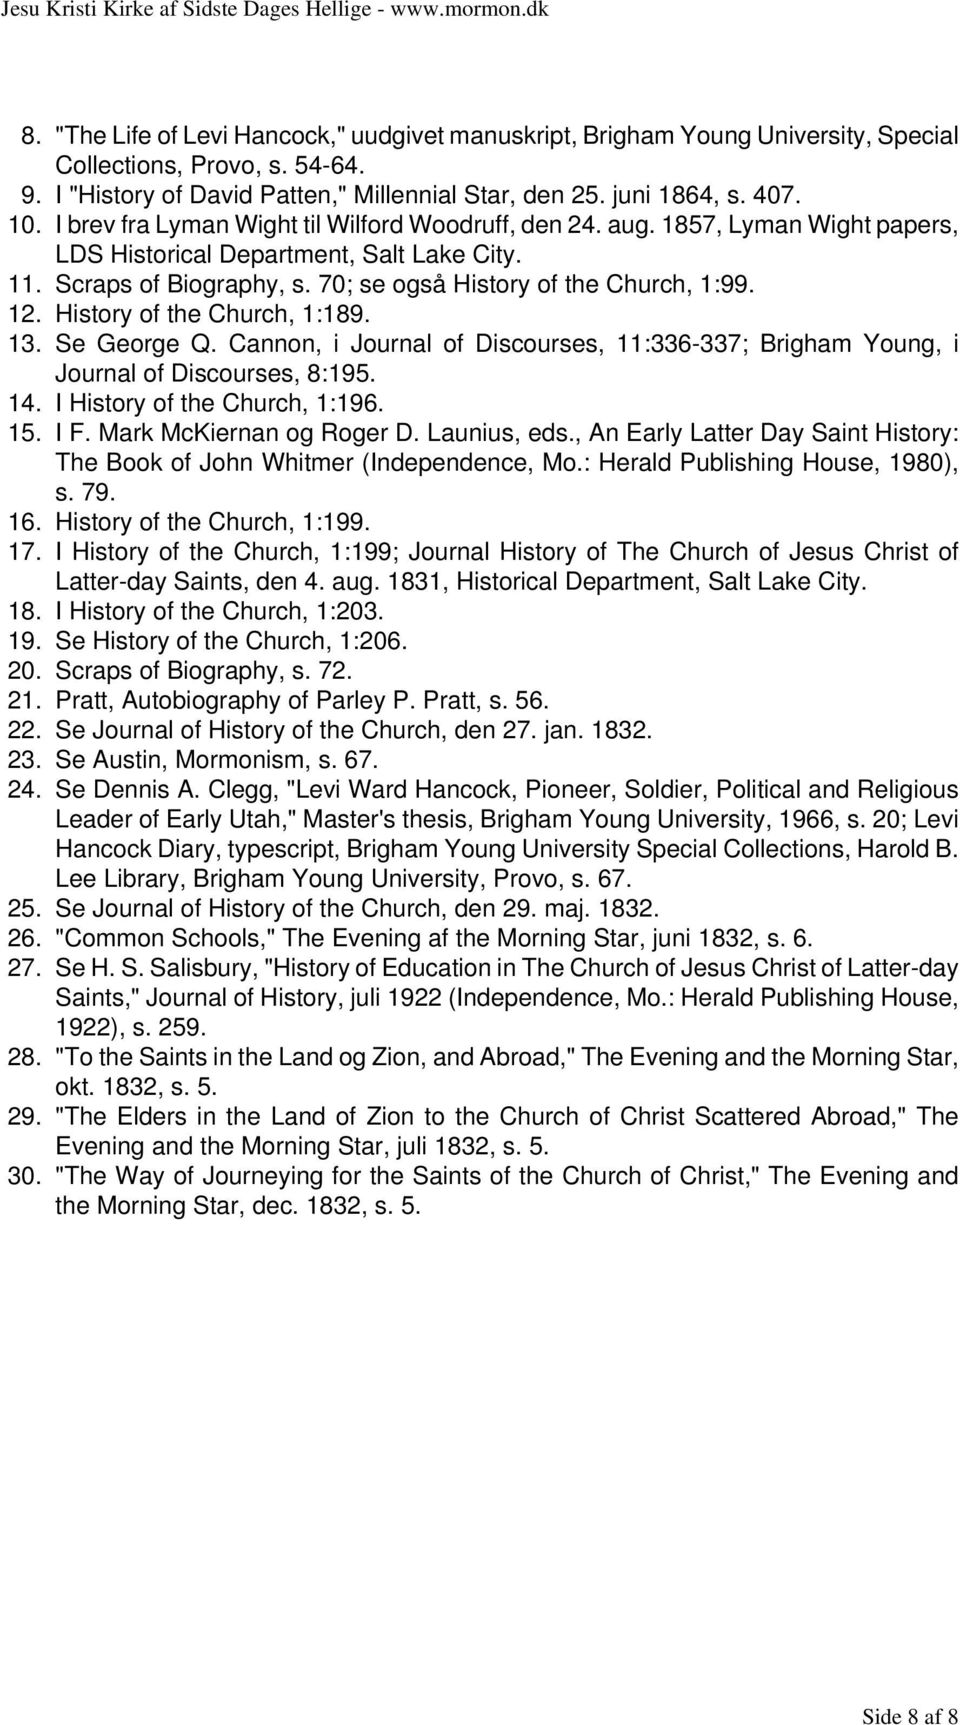 History of the Church, 1:189. 13. Se George Q. Cannon, i Journal of Discourses, 11:336-337; Brigham Young, i Journal of Discourses, 8:195. 14. I History of the Church, 1:196. 15. I F.